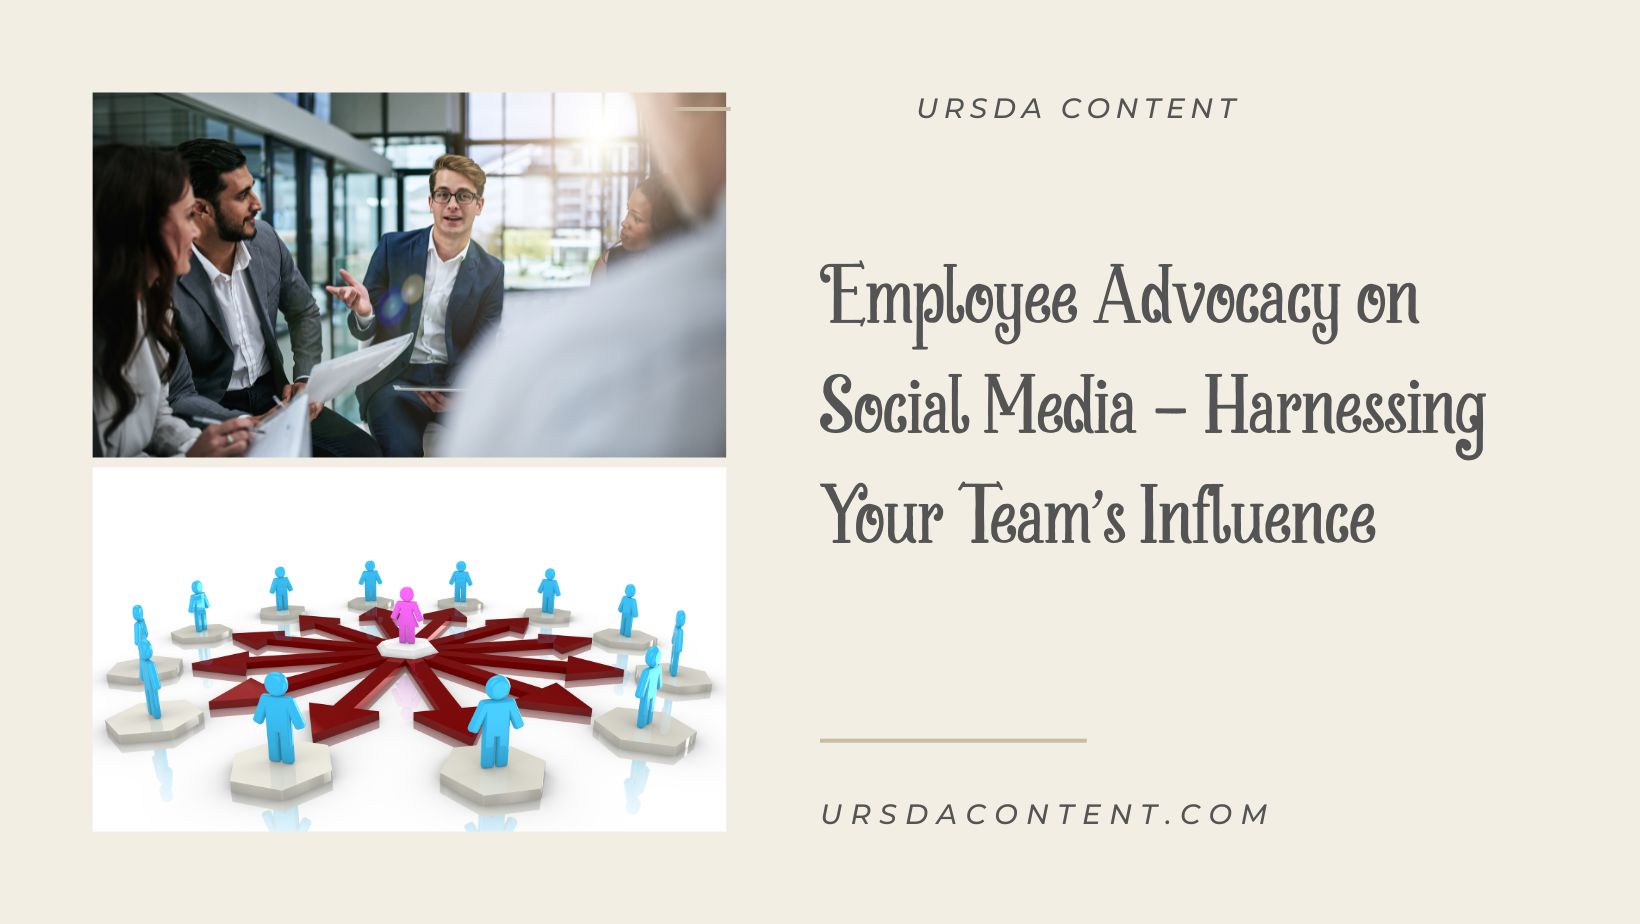 Employee Advocacy on Social Media - Harnessing Your Team's Influence